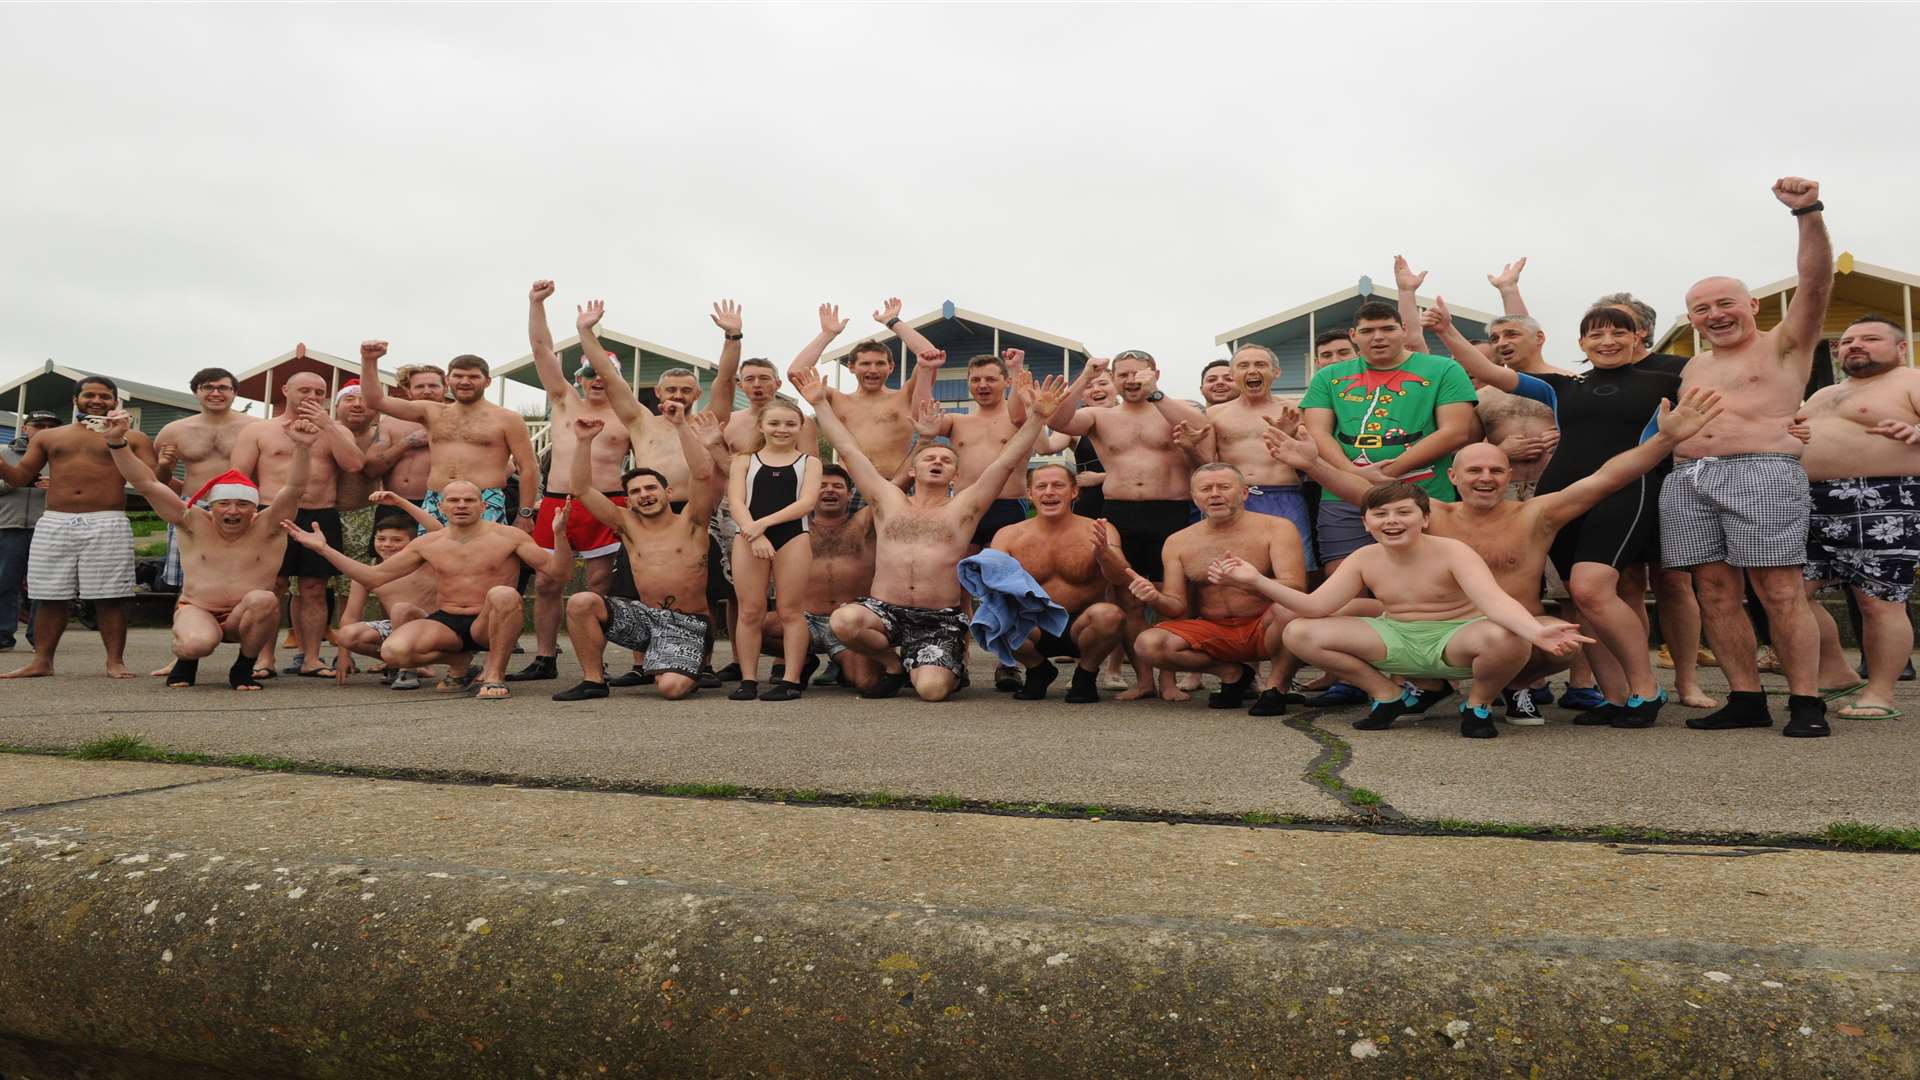 The annual Christmas swim is celebrated on Minster Leas